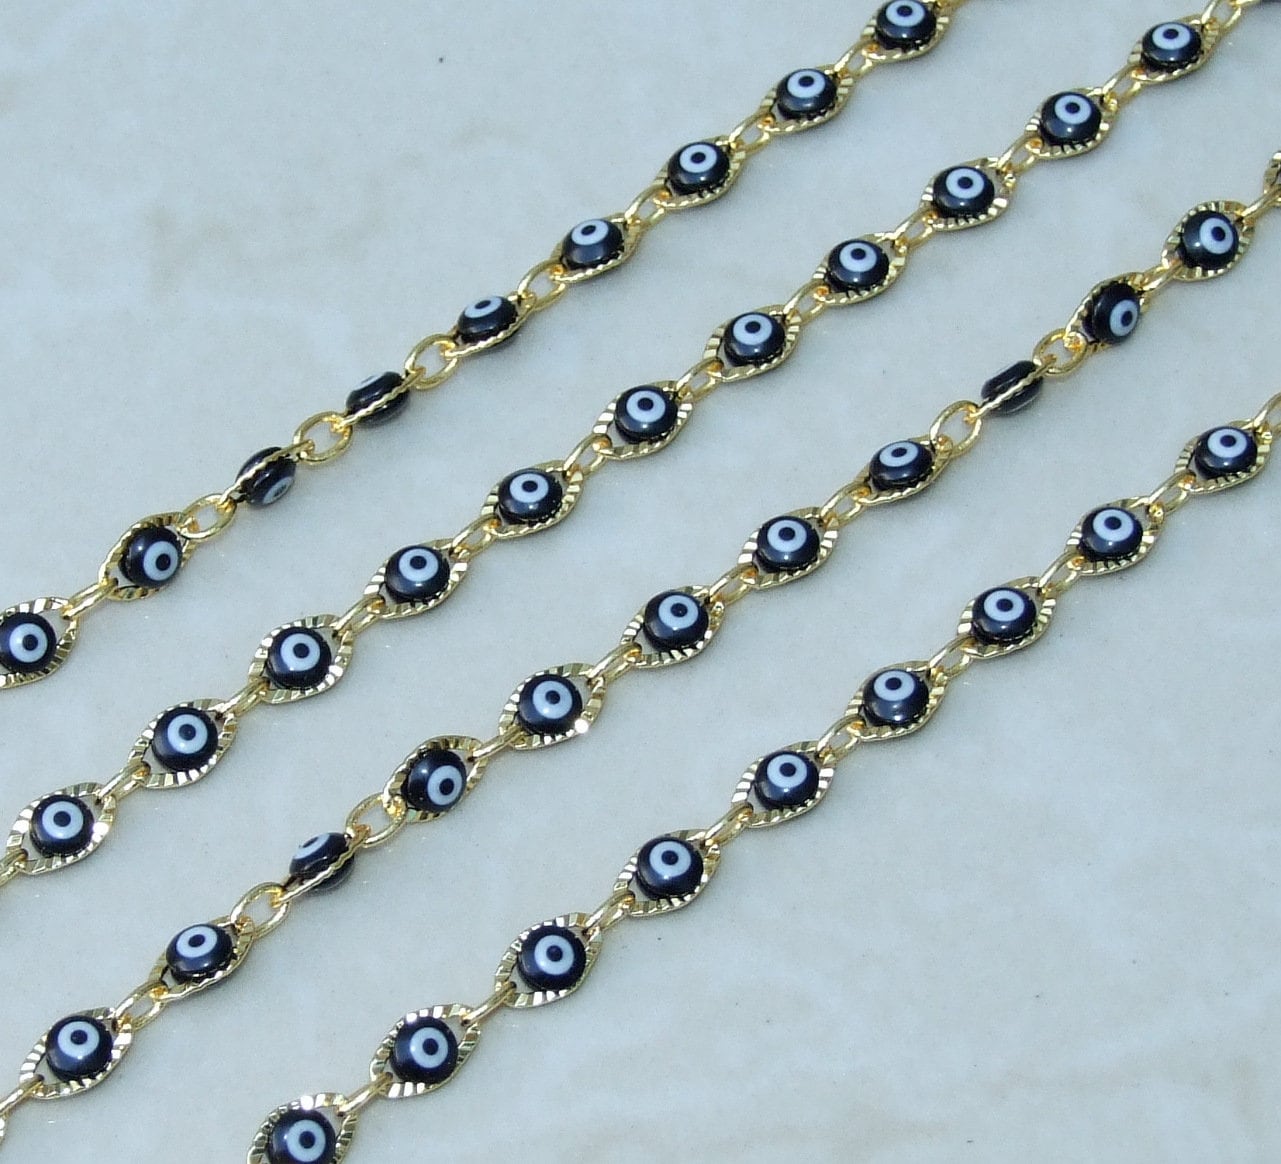 Black Glass Evil Eye Rosary Chain, Bulk Chain, Marquee Bead, Beaded Chain, Body Chain Jewelry, Gold Chain, Necklace Chain, Belly Chain